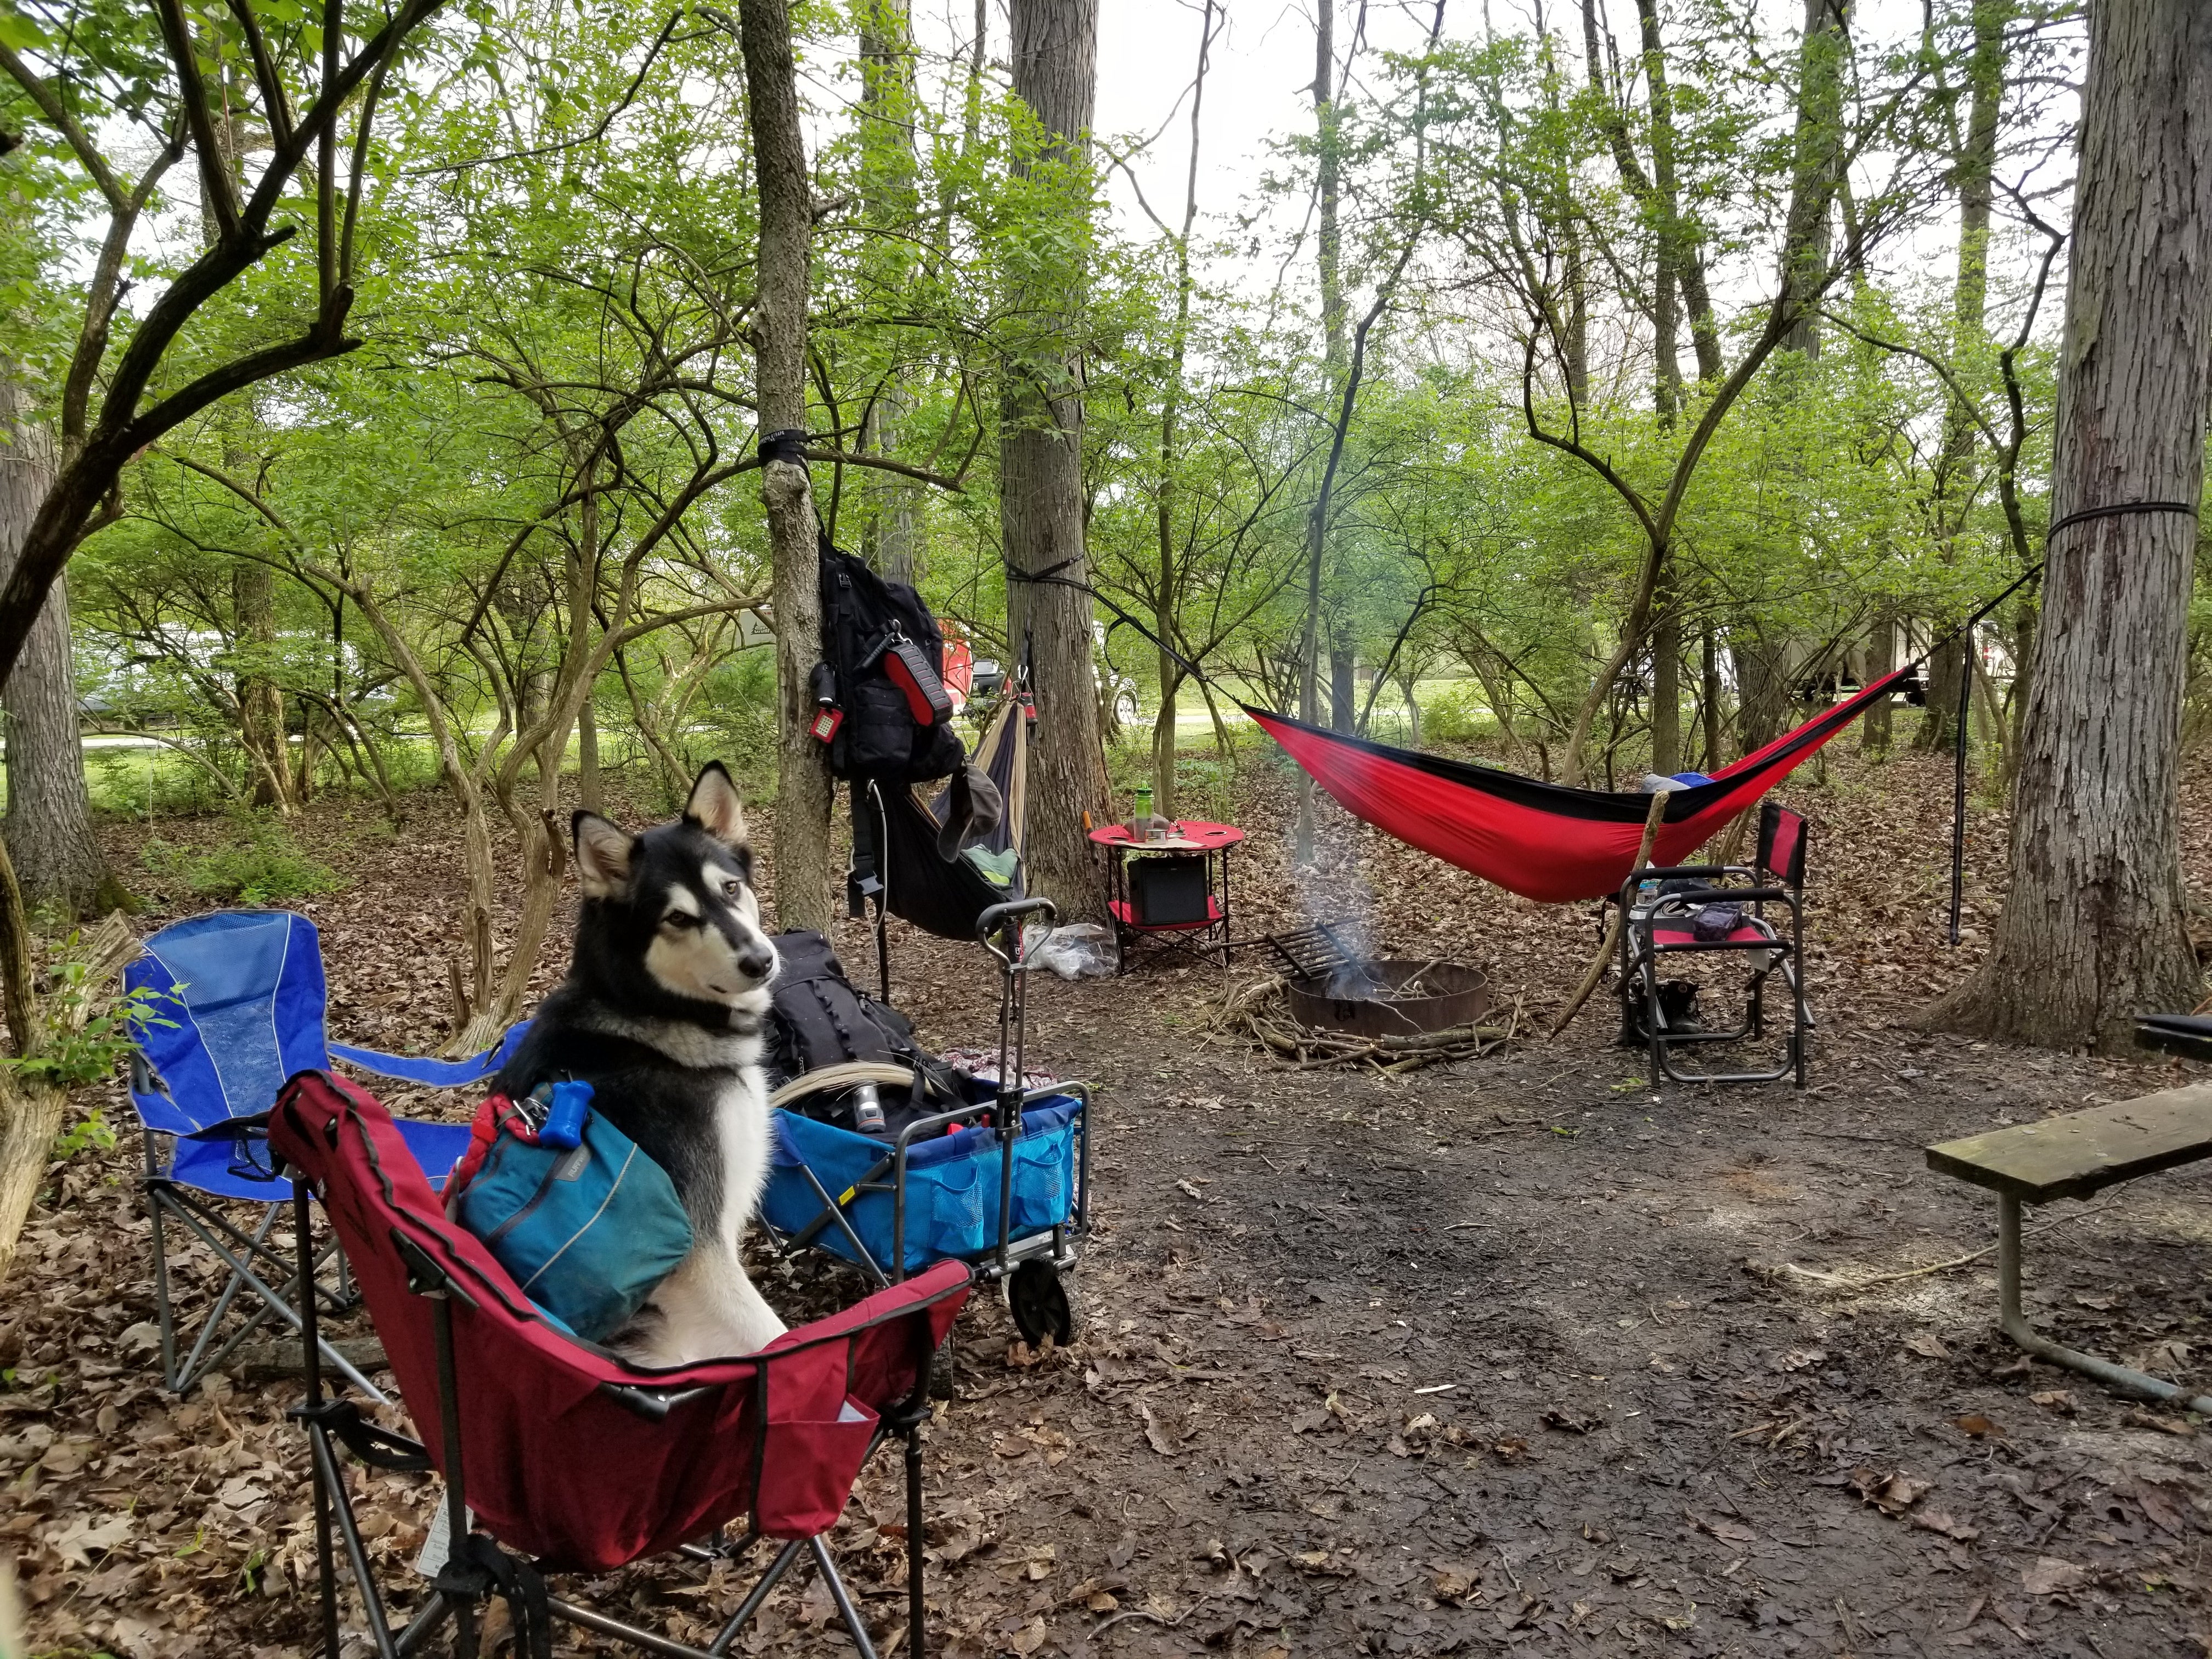 The third hammock isn't up yet in this picture, but all 3 fit very comfortably around the fire. 